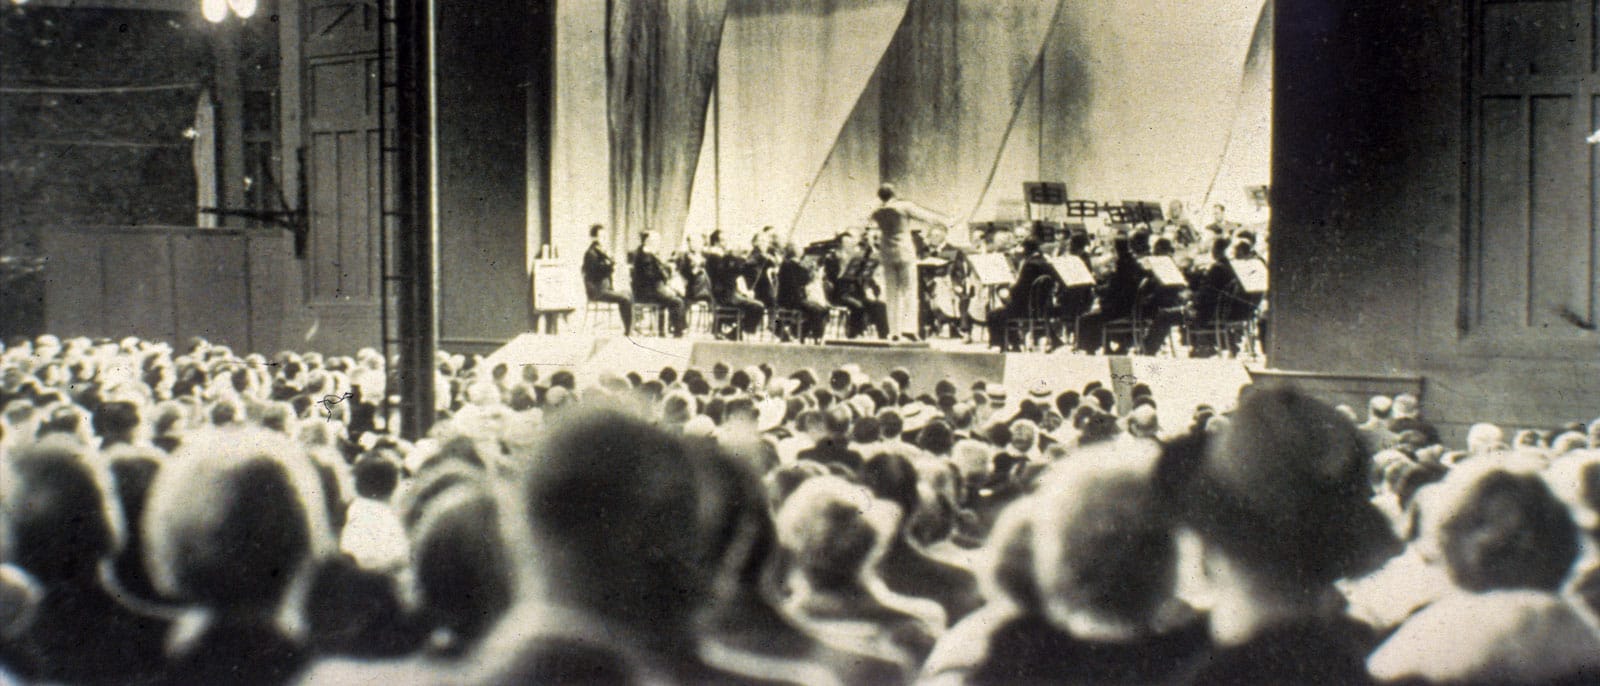 Vintage photo of crowd of people watching orchestral performance on stage